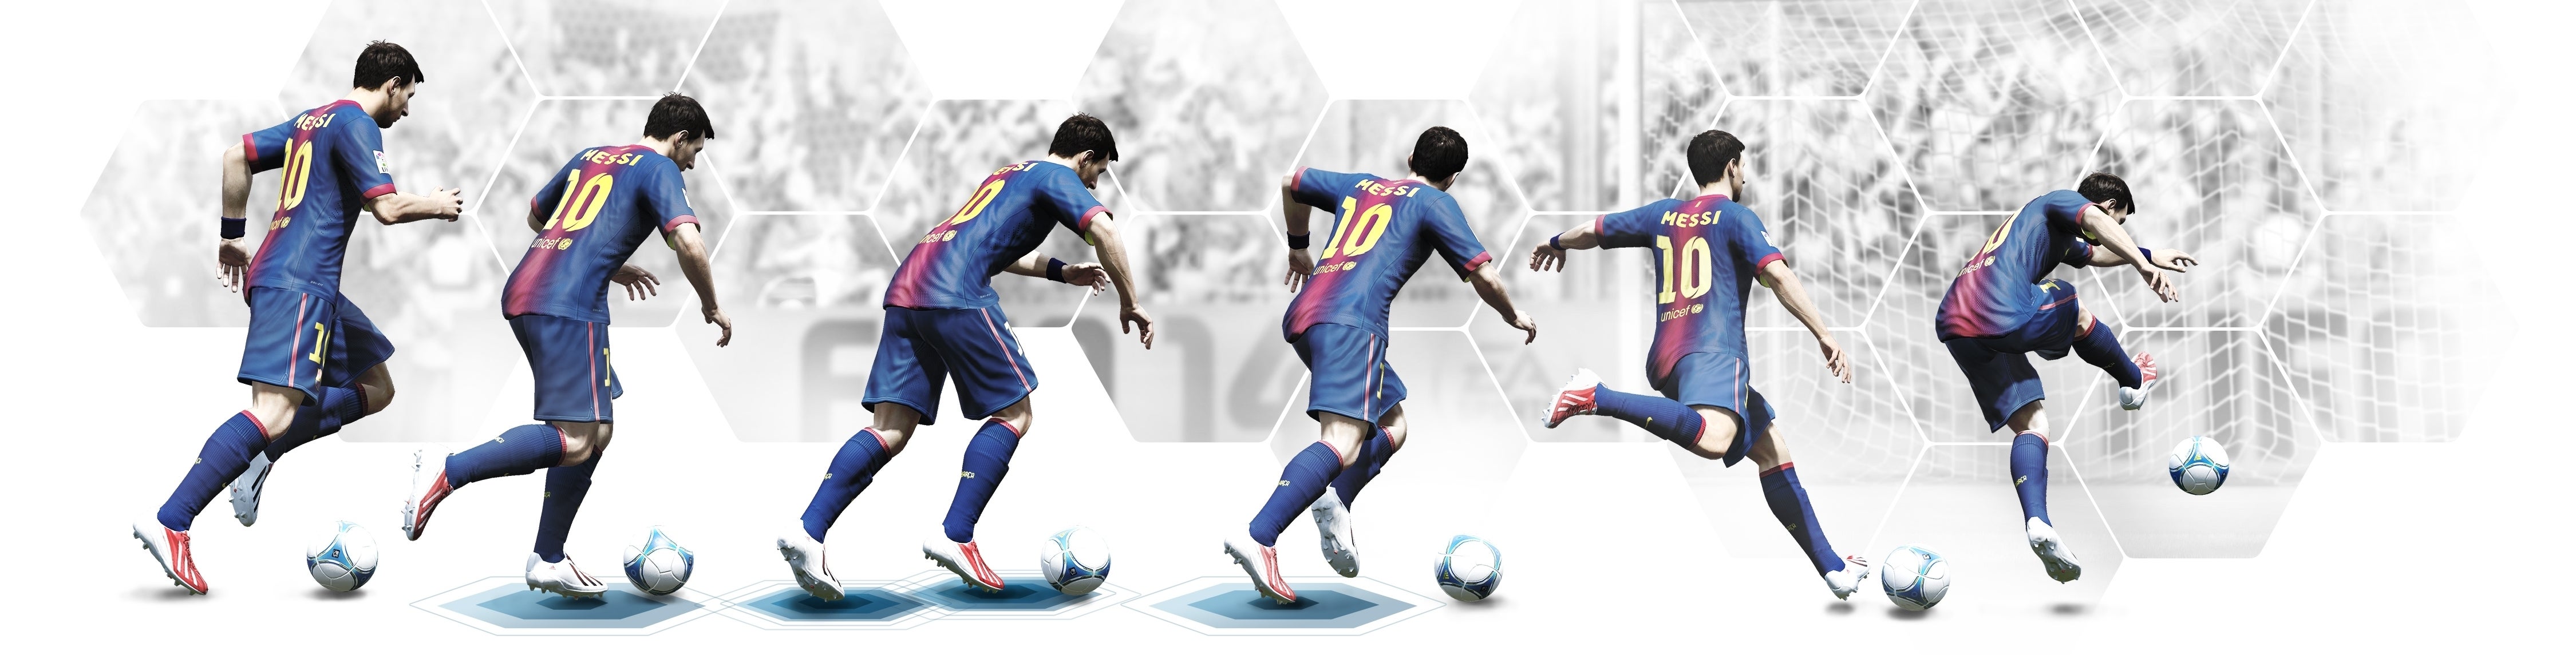 Image for FIFA 14: recreating the emotion of scoring great goals